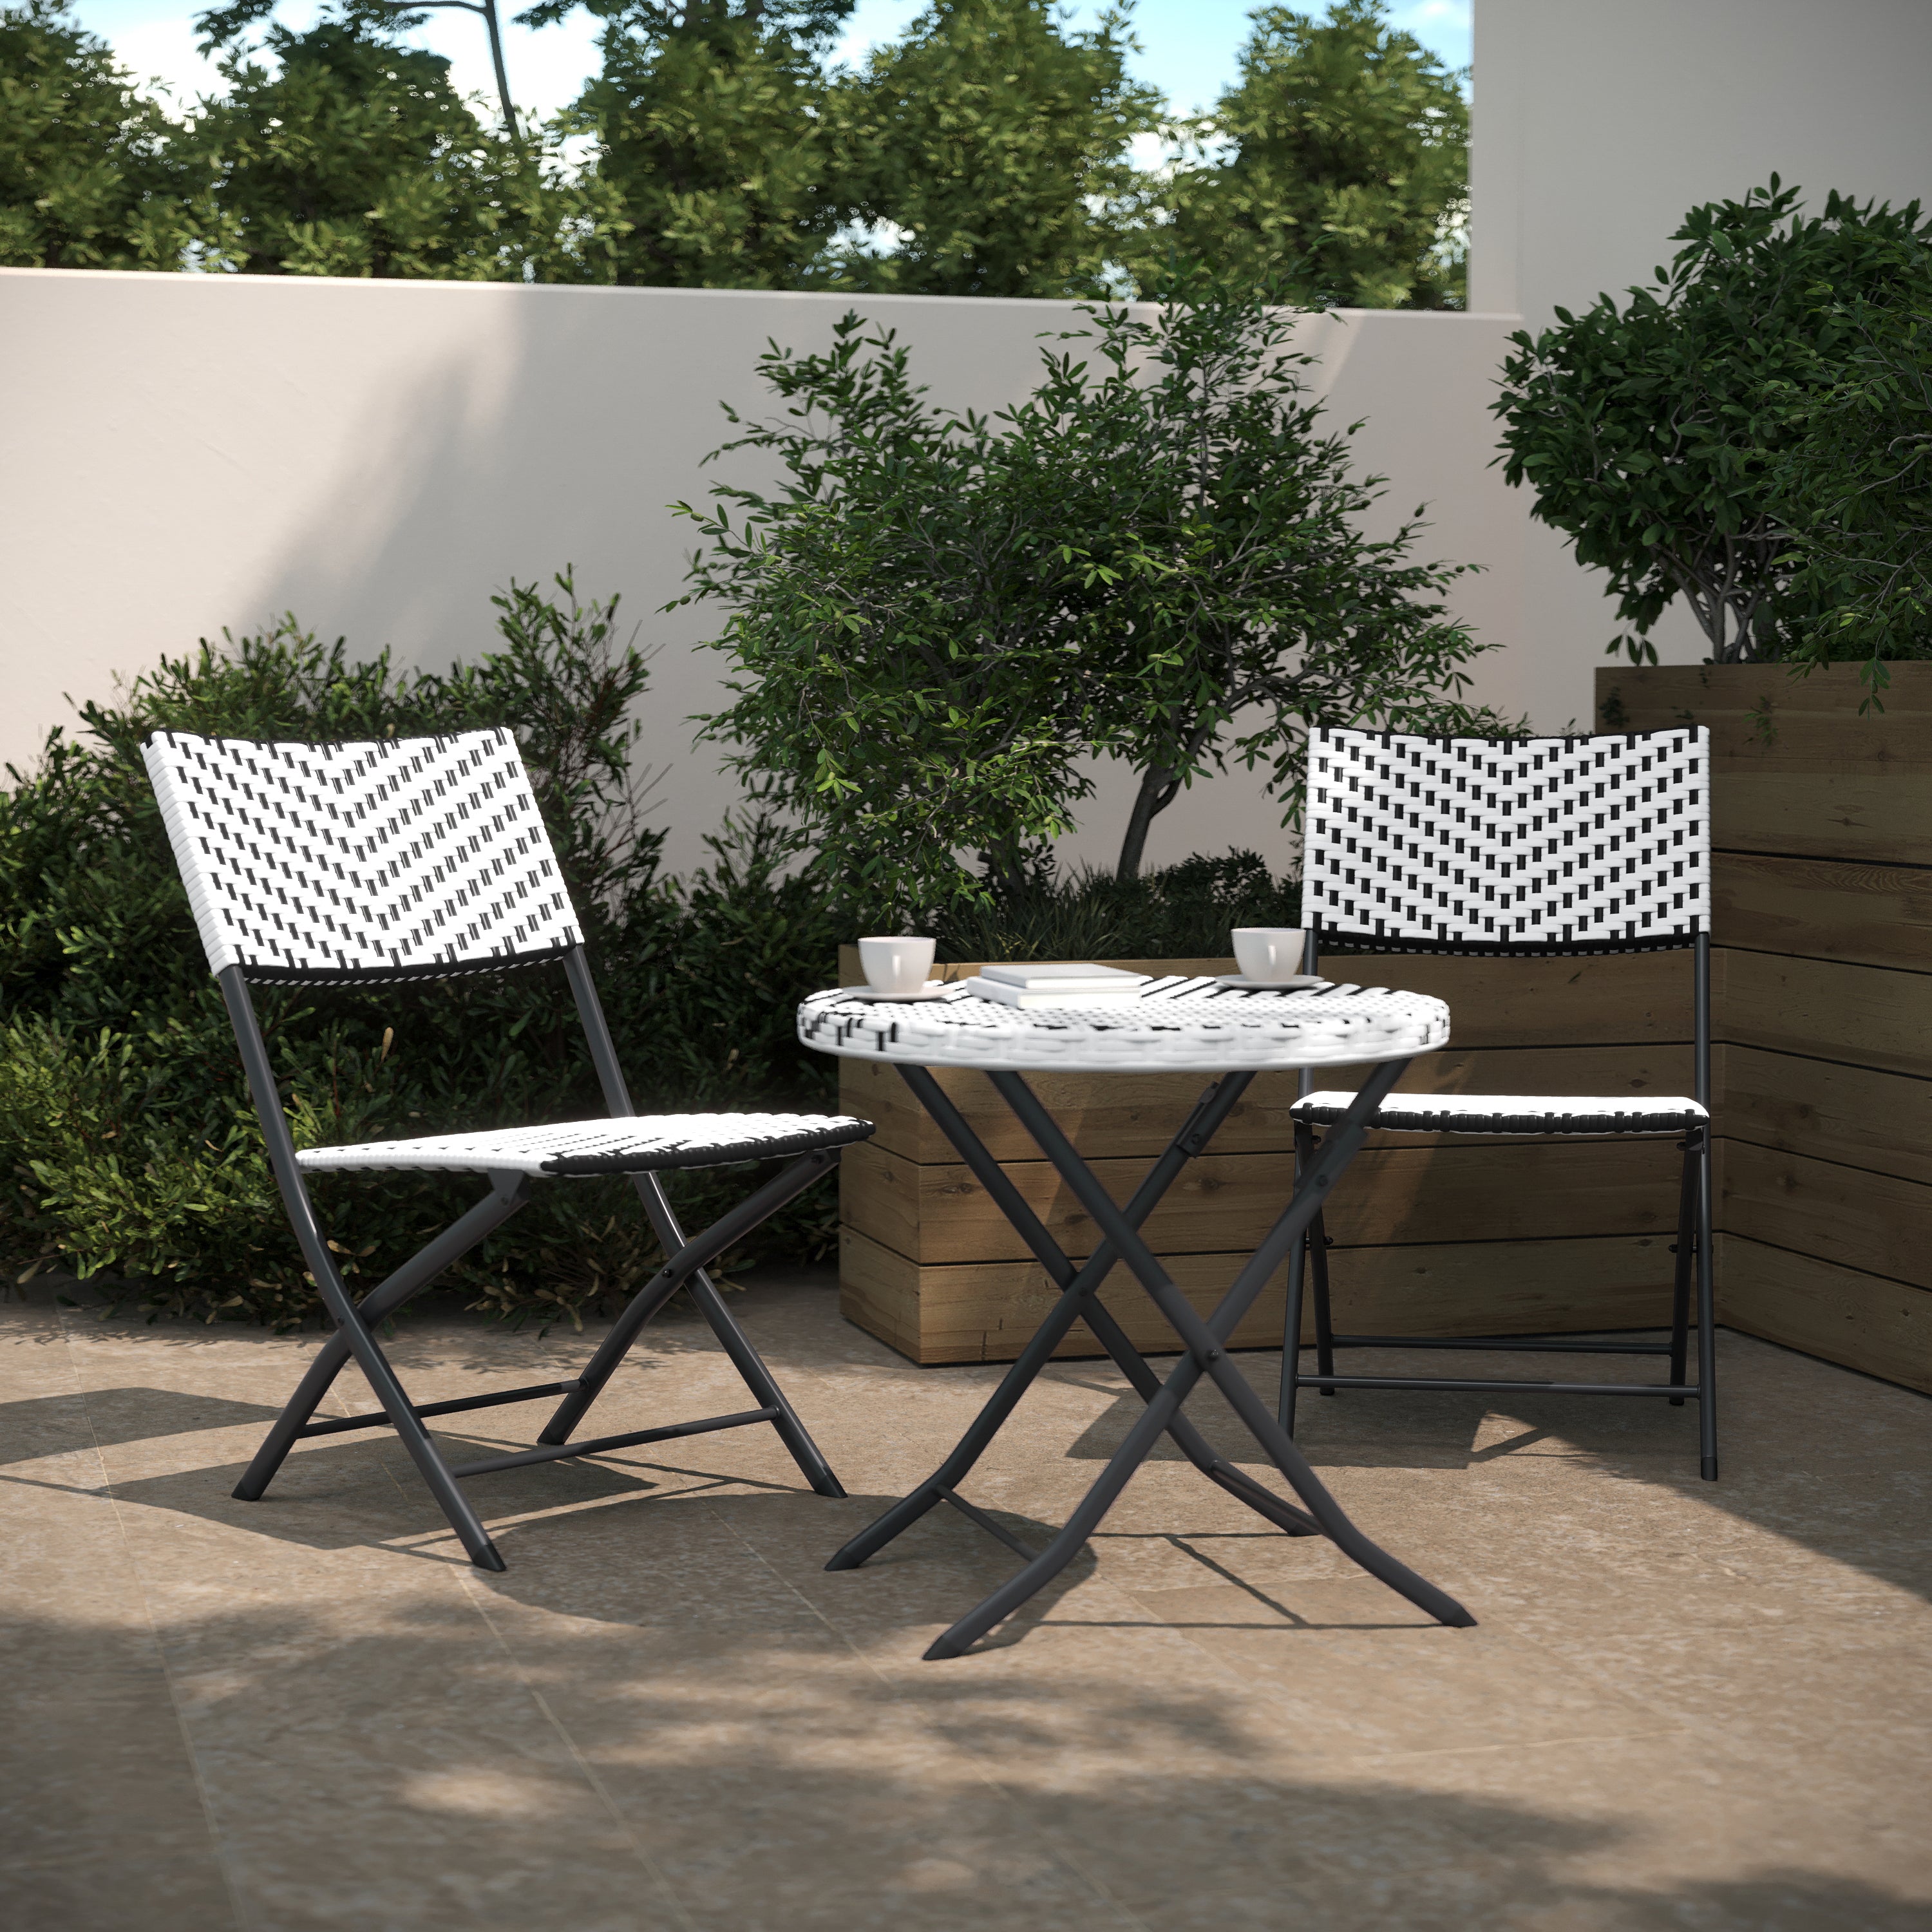 Rouen Three Piece Folding French Bistro Set in PE Rattan with Metal Frames for Indoor and Outdoor Use-Folding French Bistro Set-Flash Furniture-Wall2Wall Furnishings